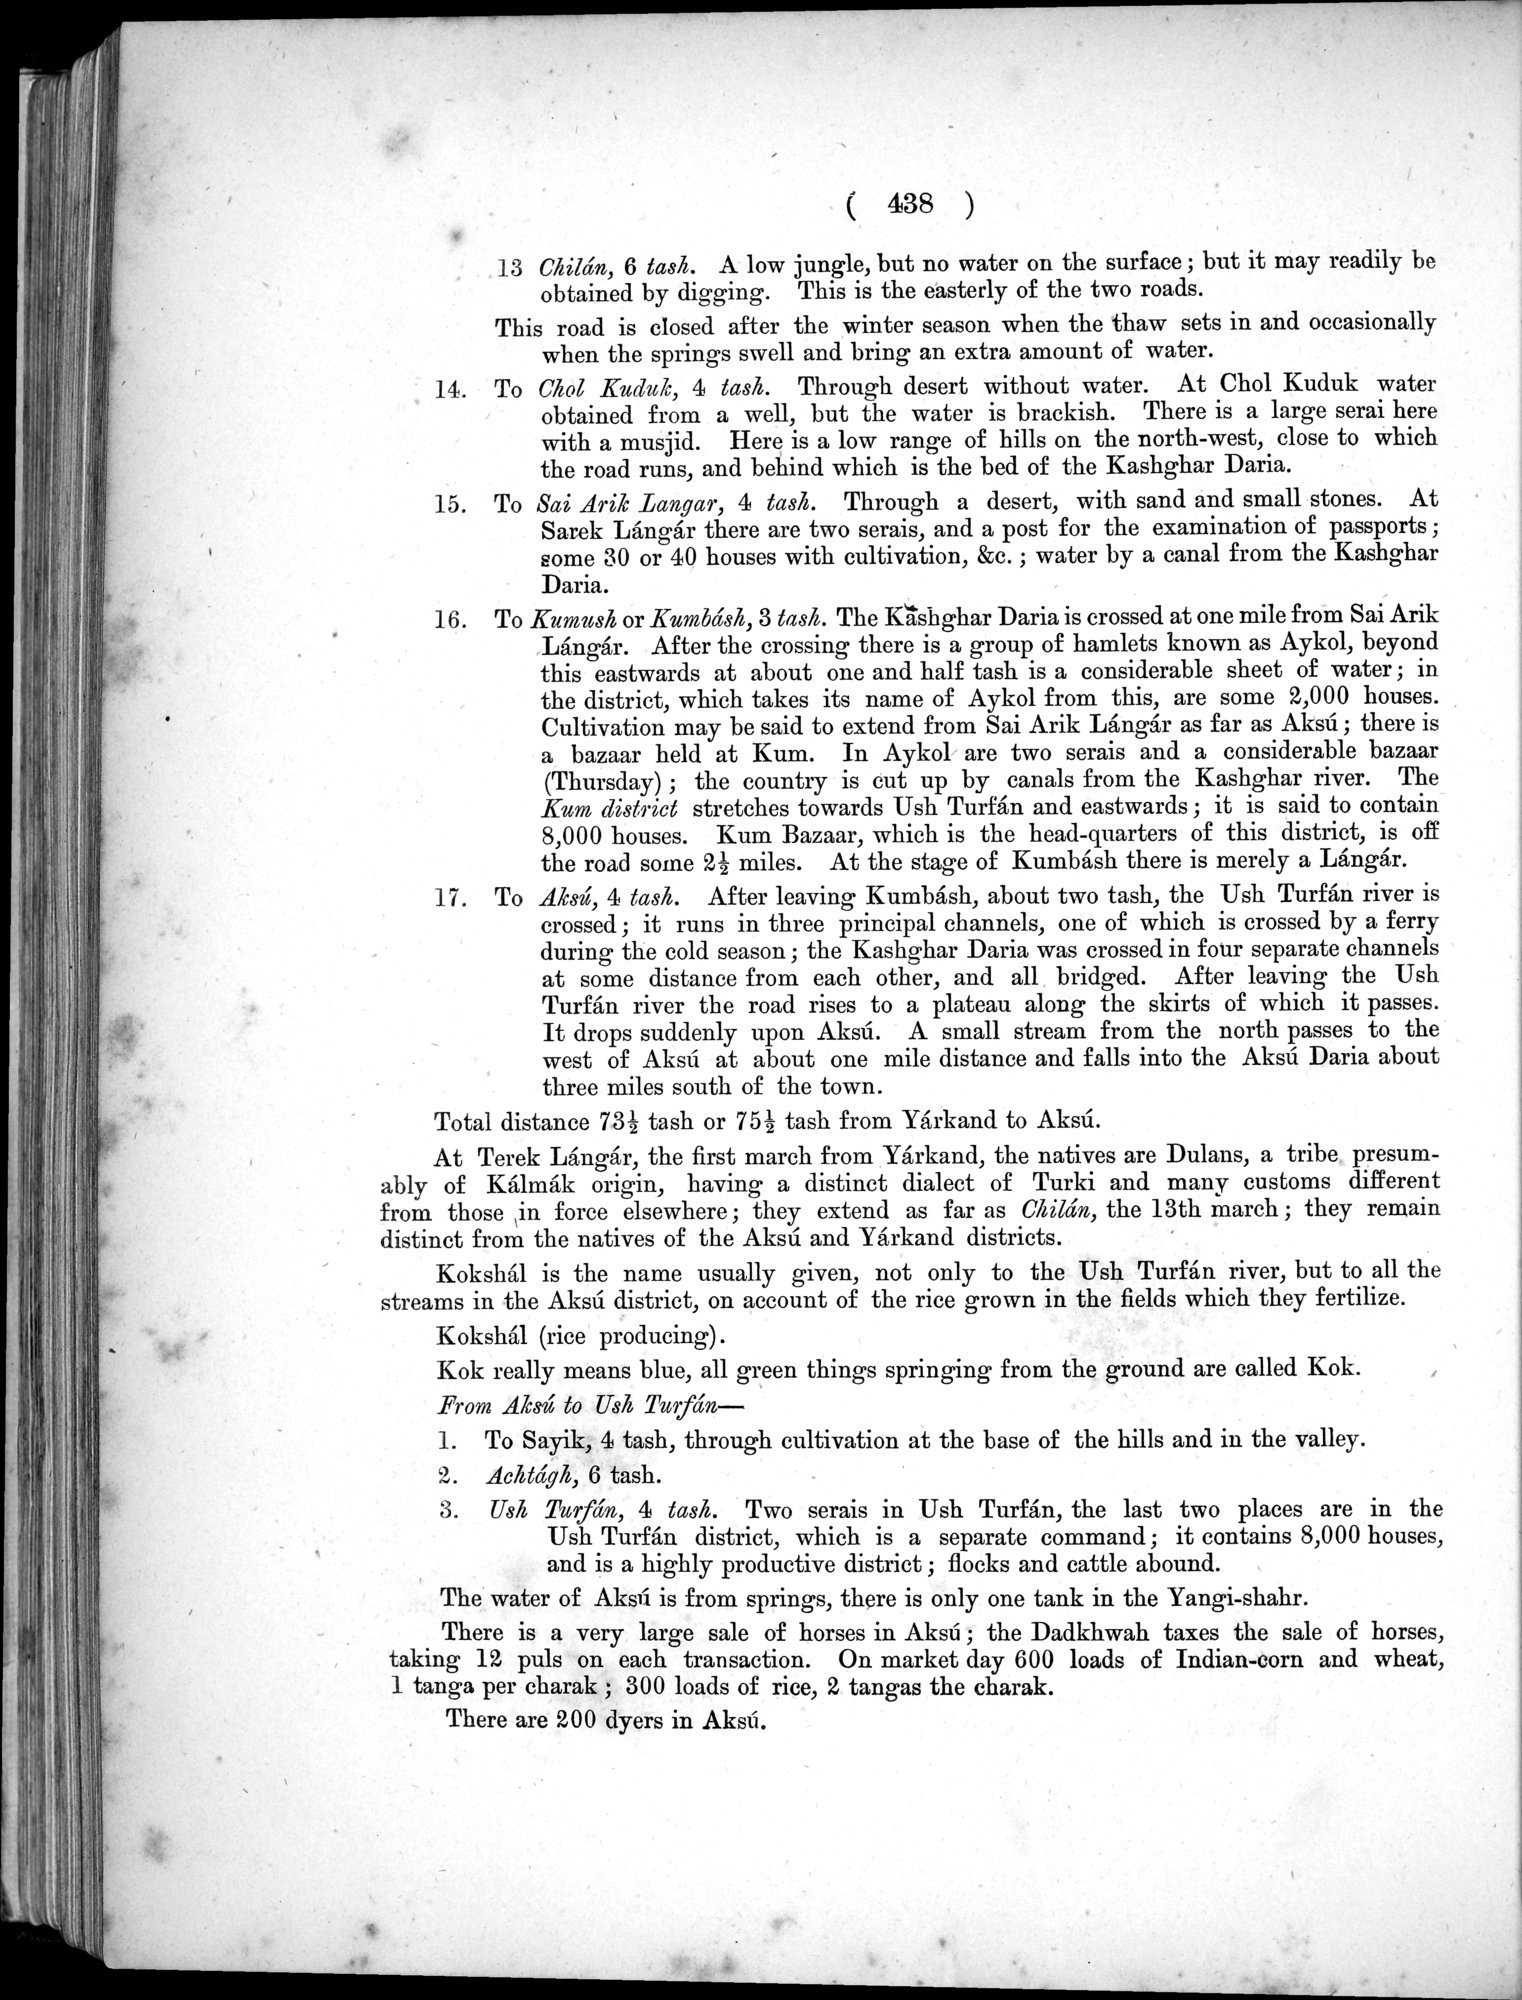 Report of a Mission to Yarkund in 1873 : vol.1 / Page 572 (Grayscale High Resolution Image)